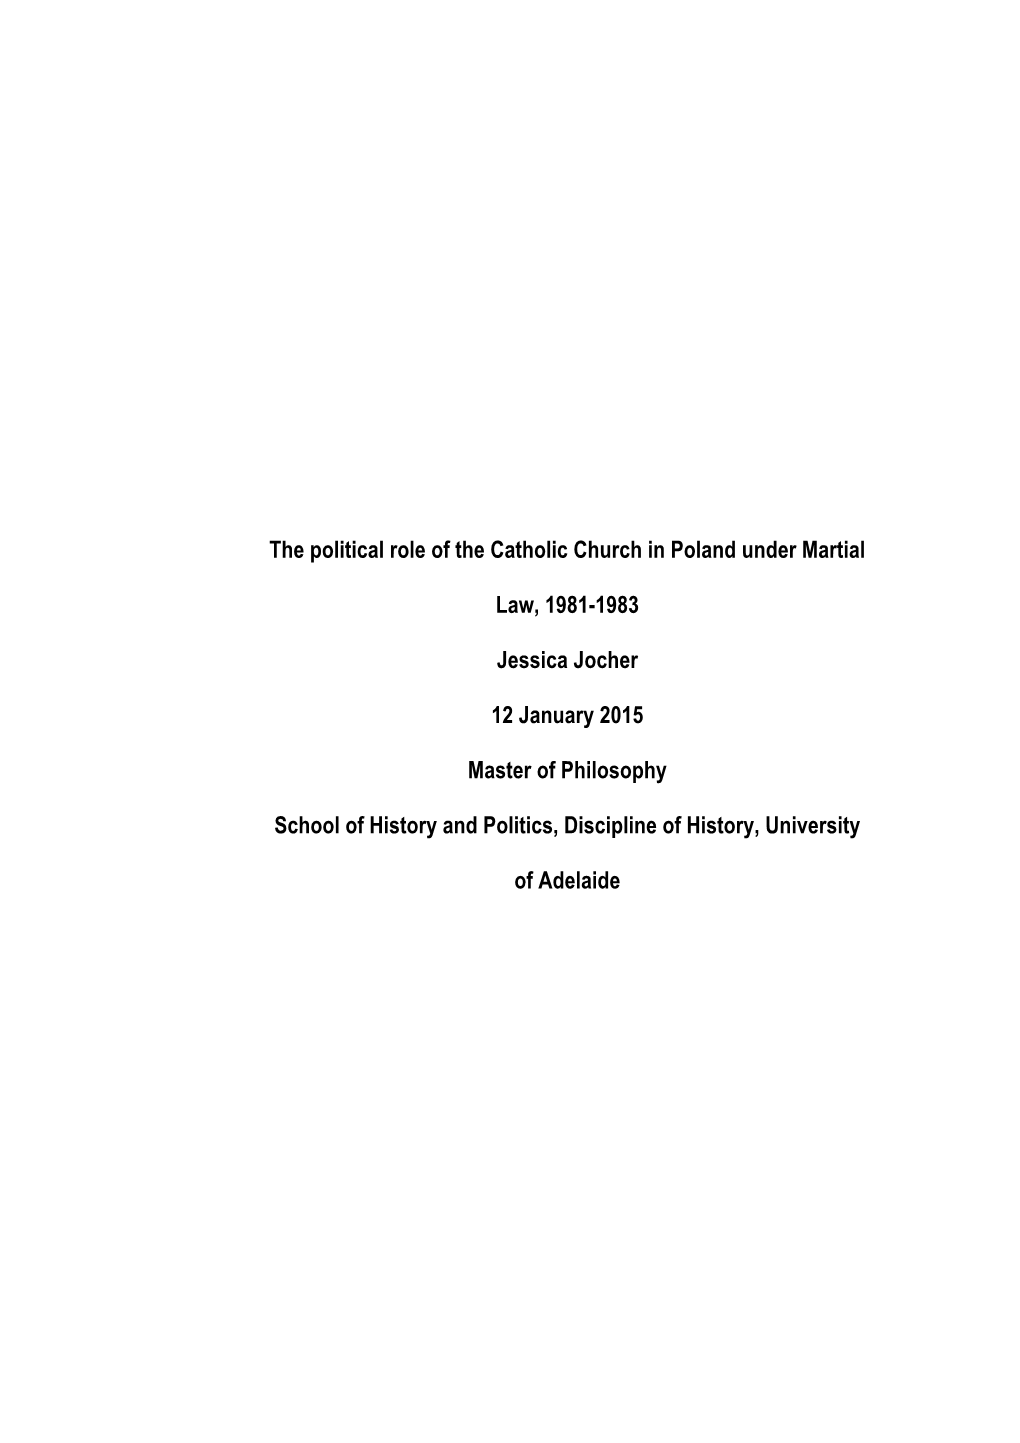 The Political Role of the Catholic Church in Poland Under Martial